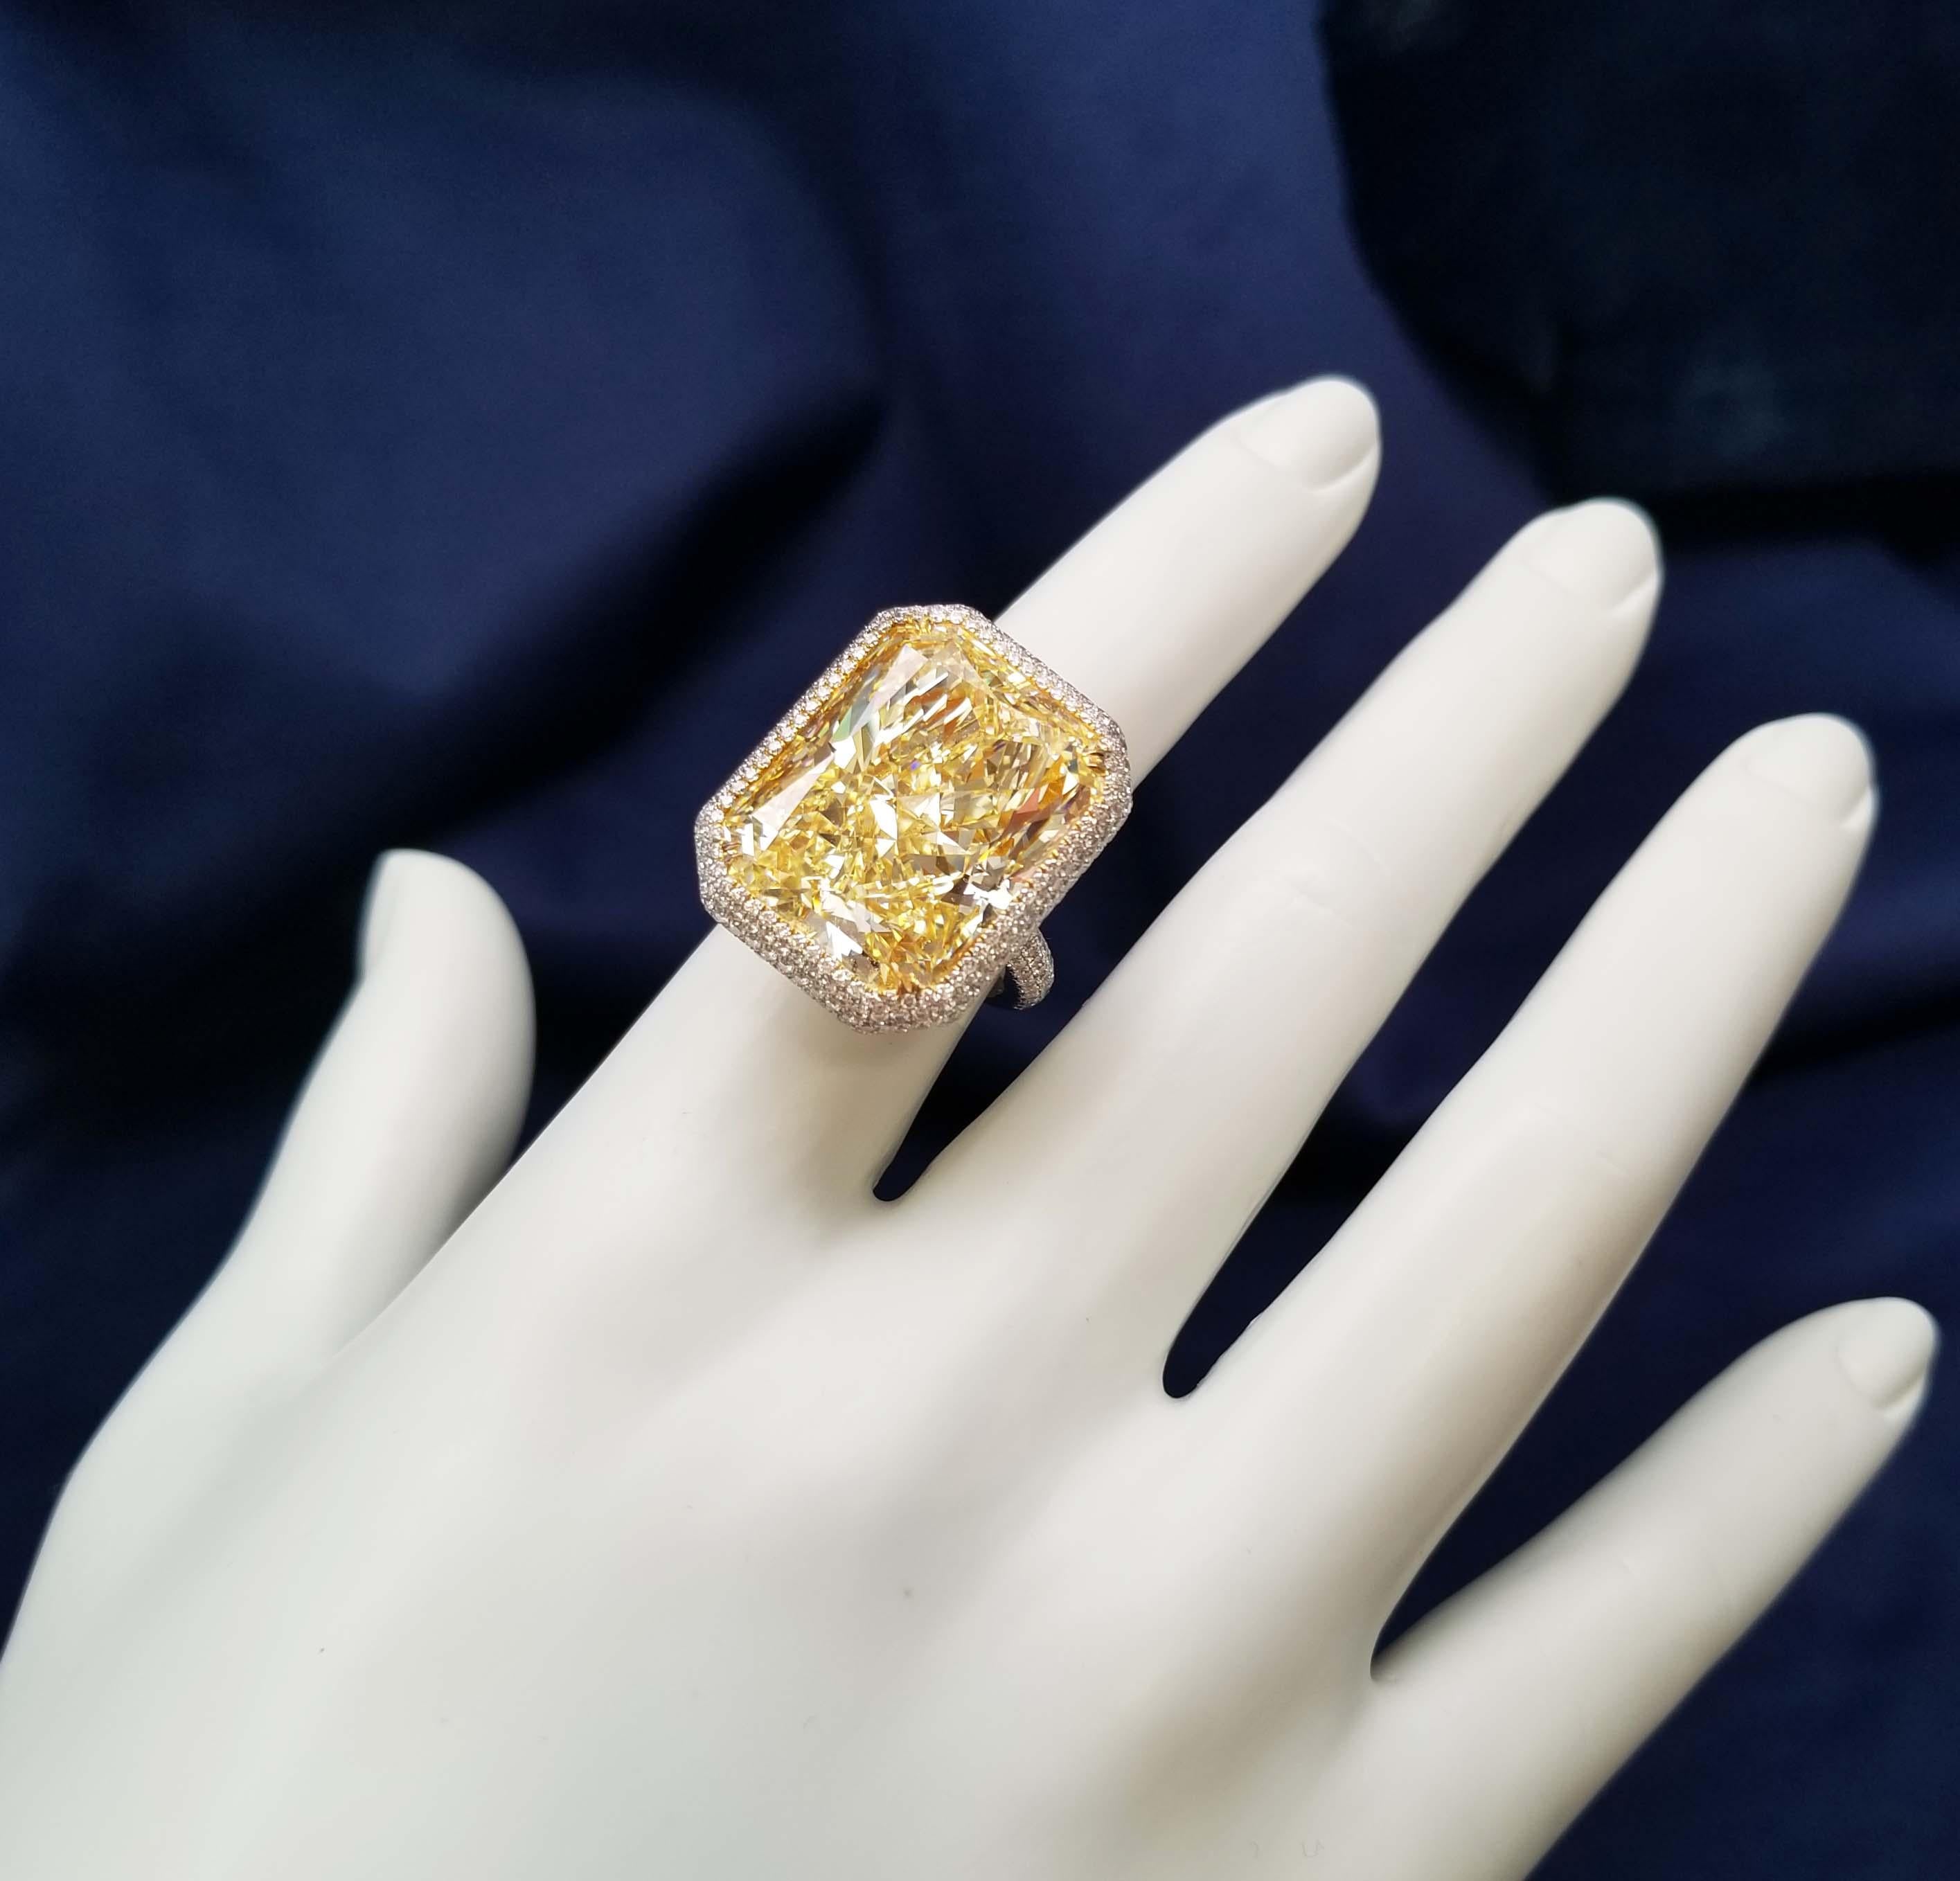 Scarselli 31 Carat Natural Fancy Yellow Diamond Ring VS1 Clarity in Platinum GIA For Sale 3